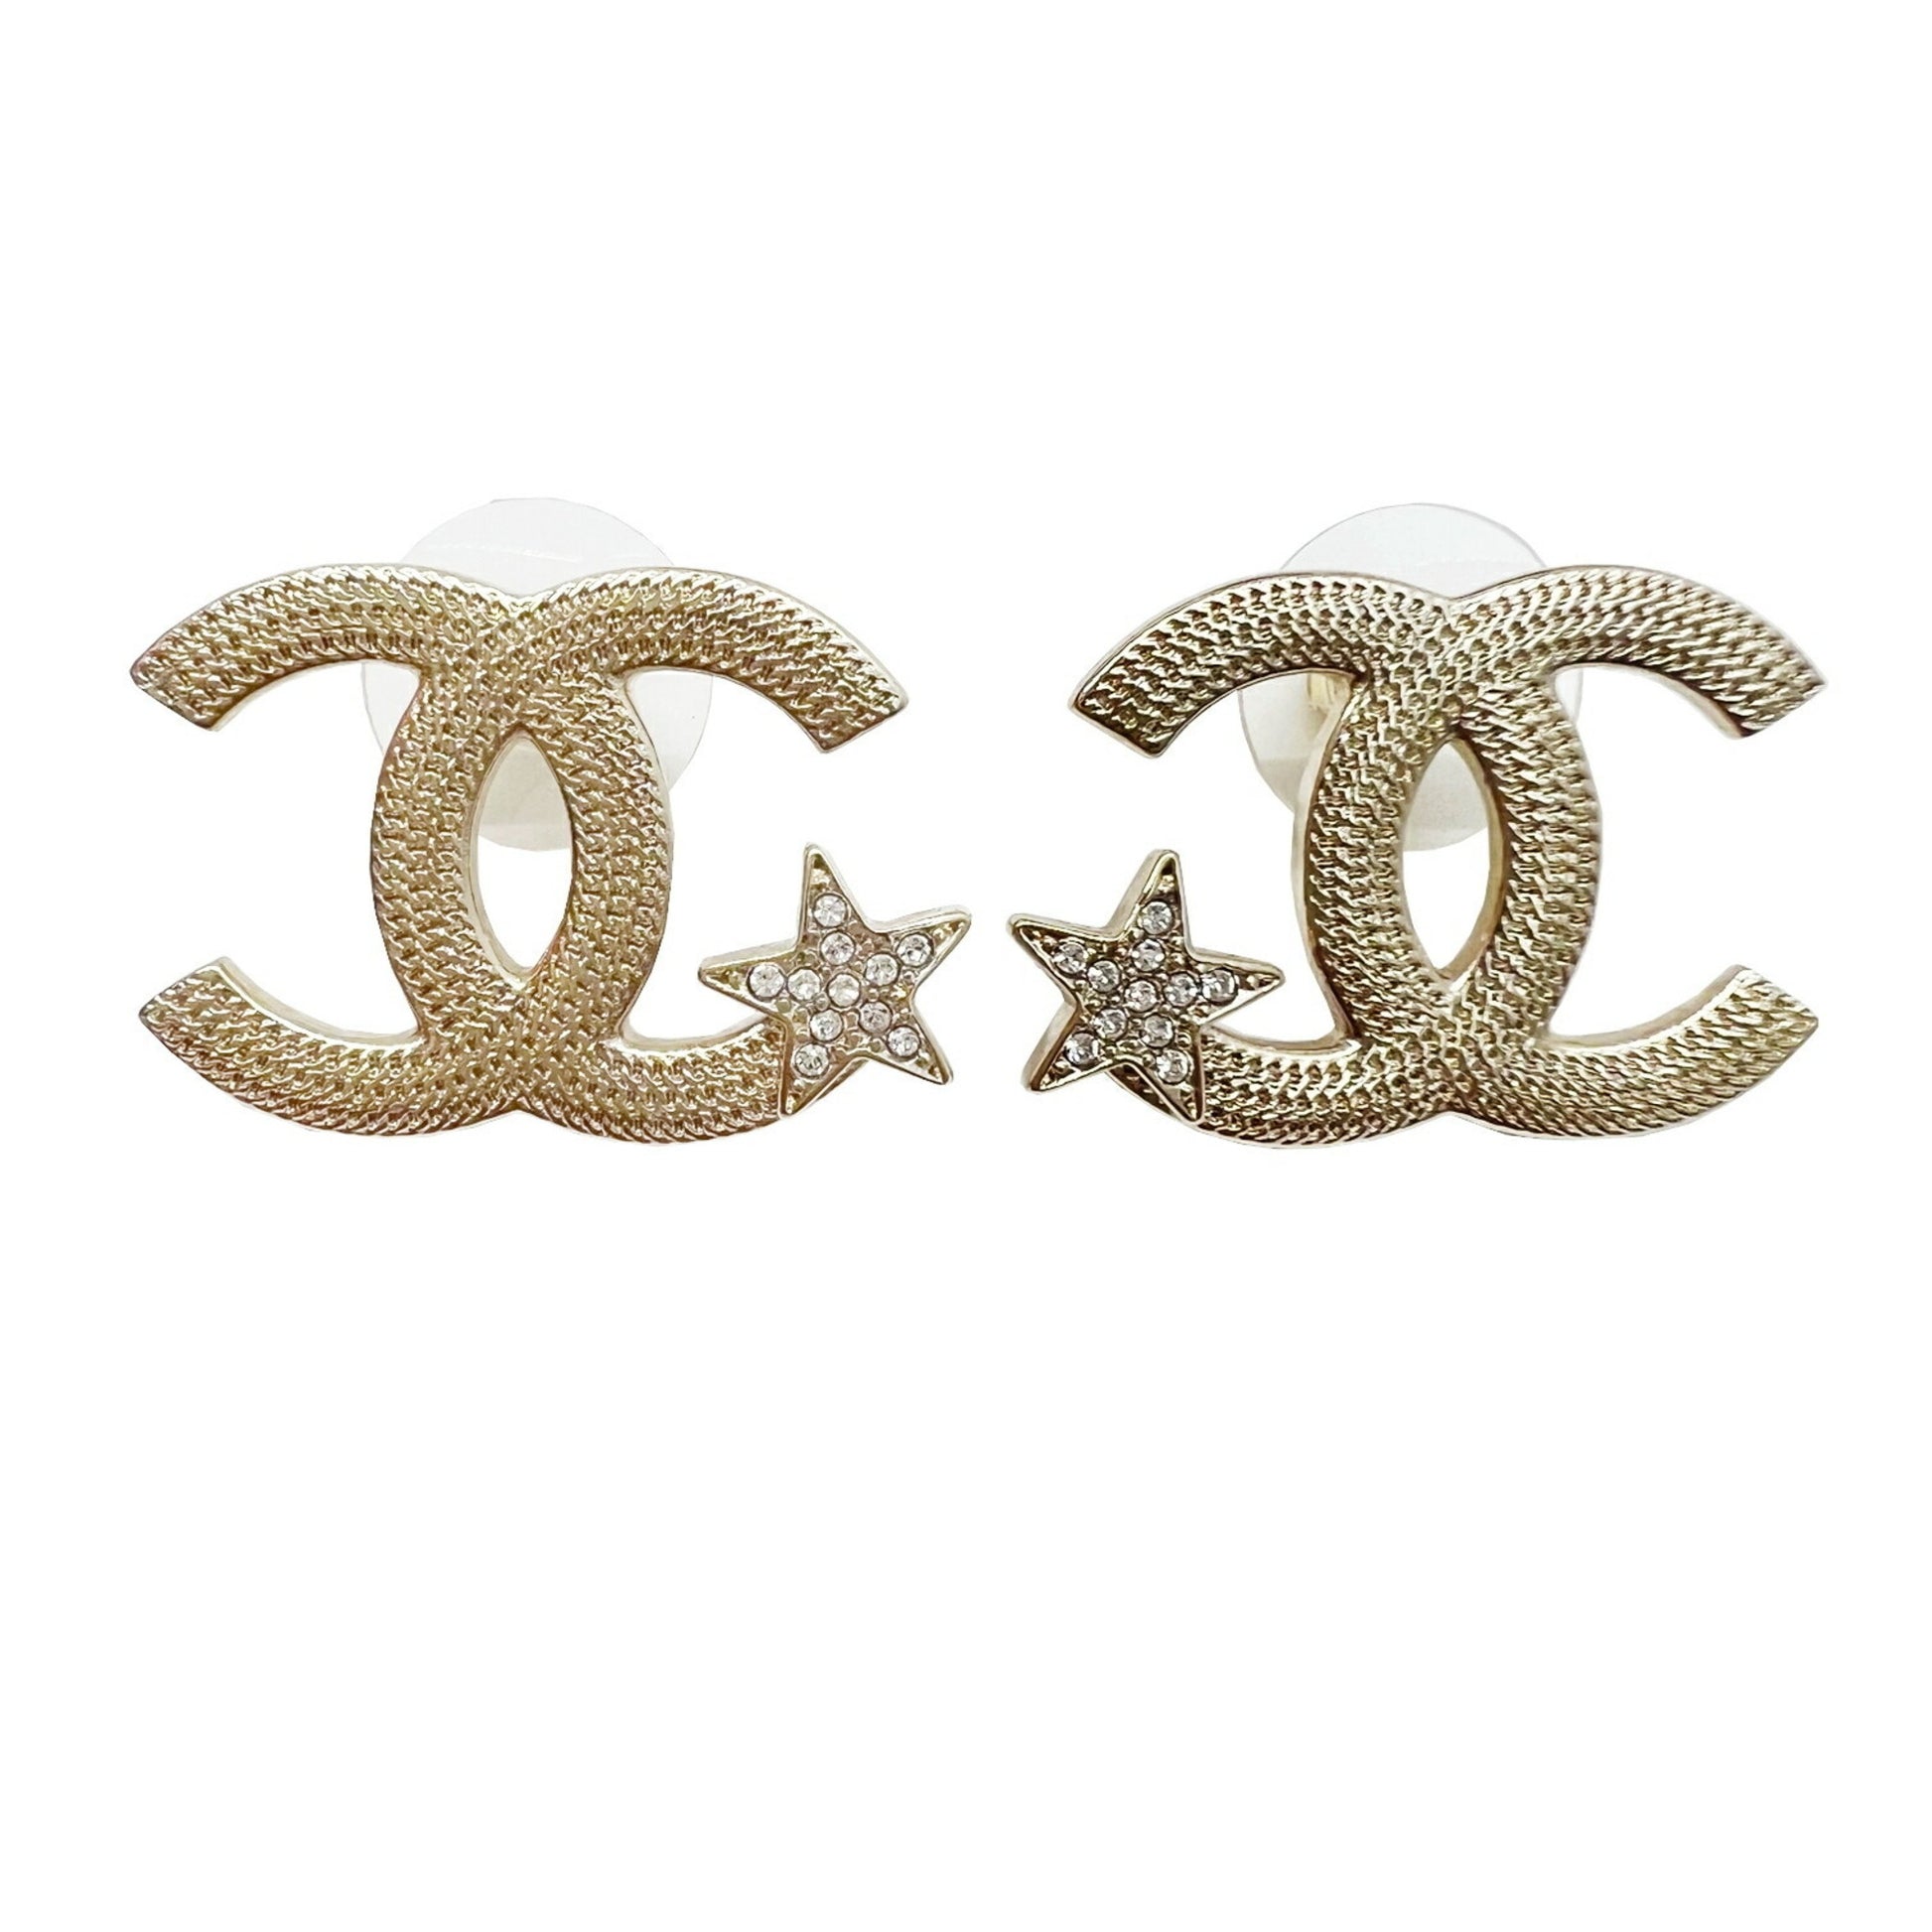 Chanel - Authenticated CC Earrings - Steel Silver for Women, Very Good Condition